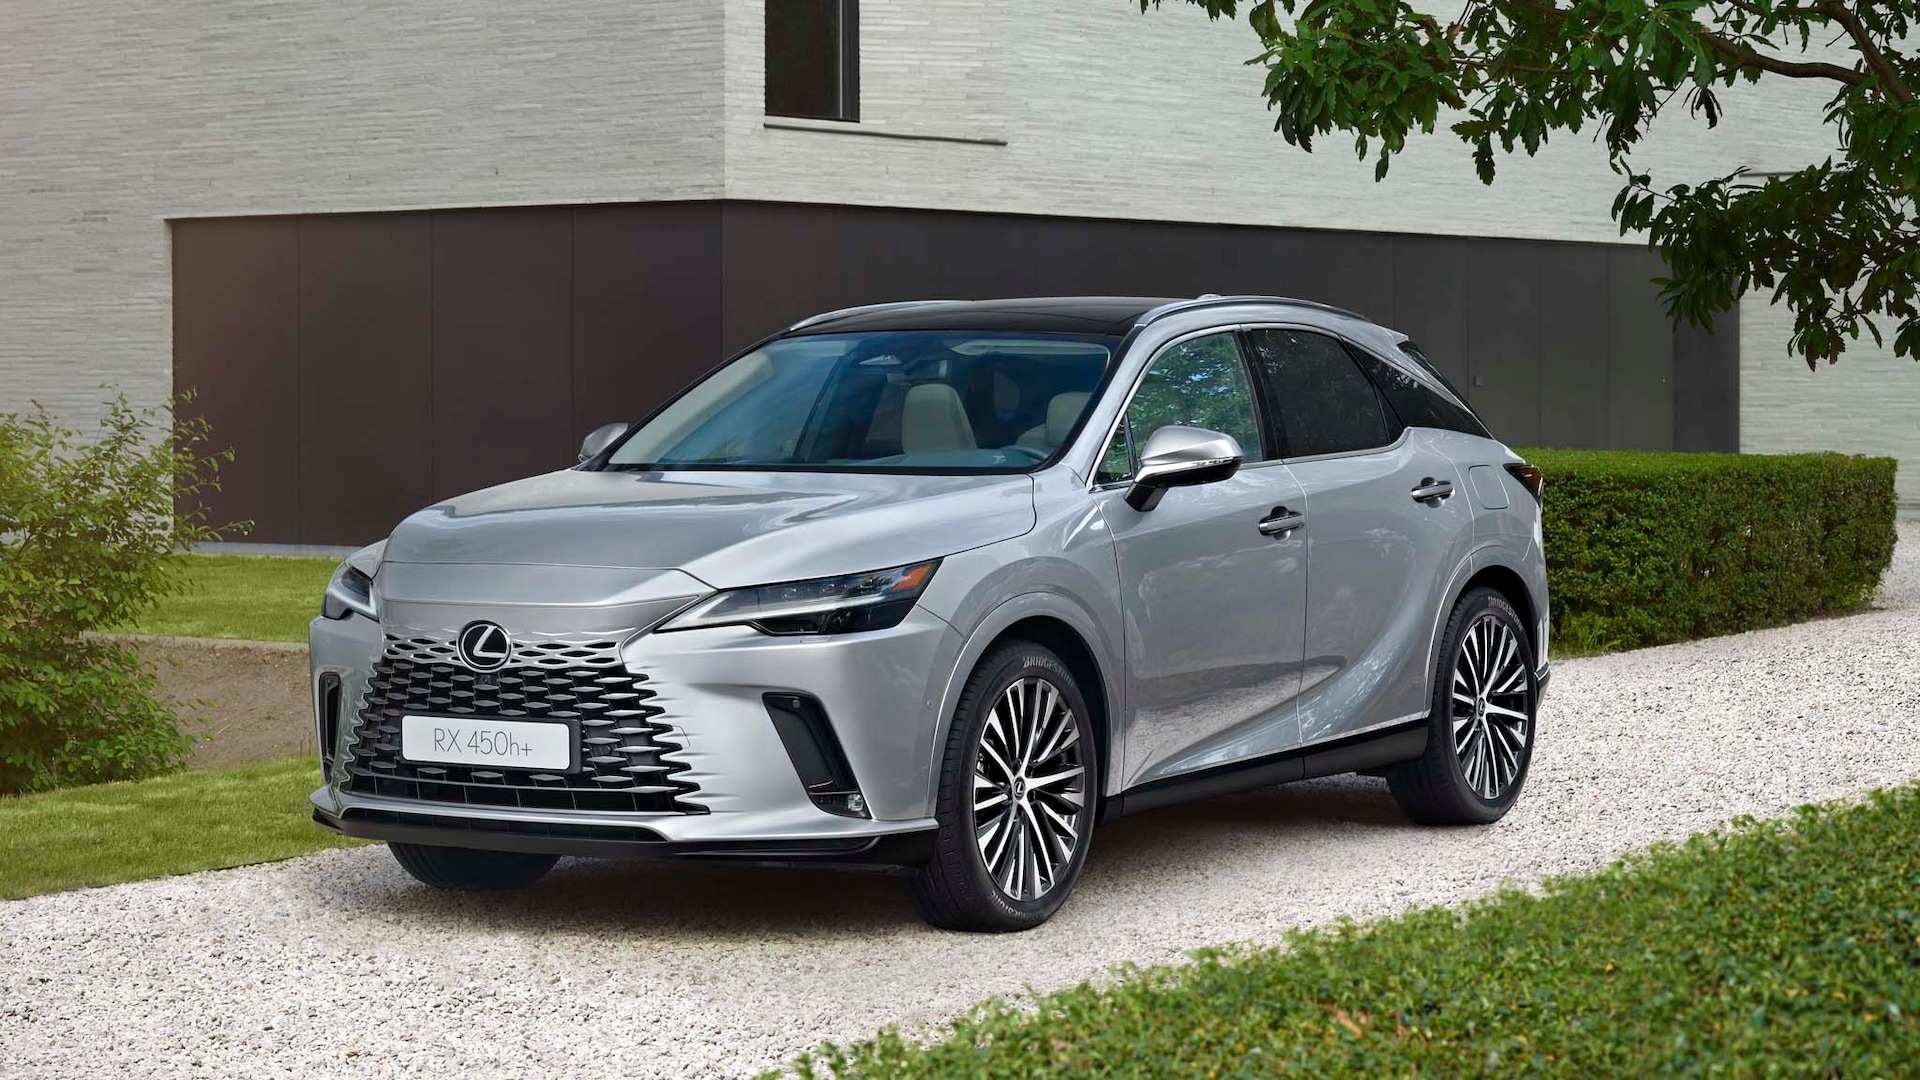 2023 Lexus RX450h+ Plug-In Hybrid Review: A Quick Spin in a Prototype